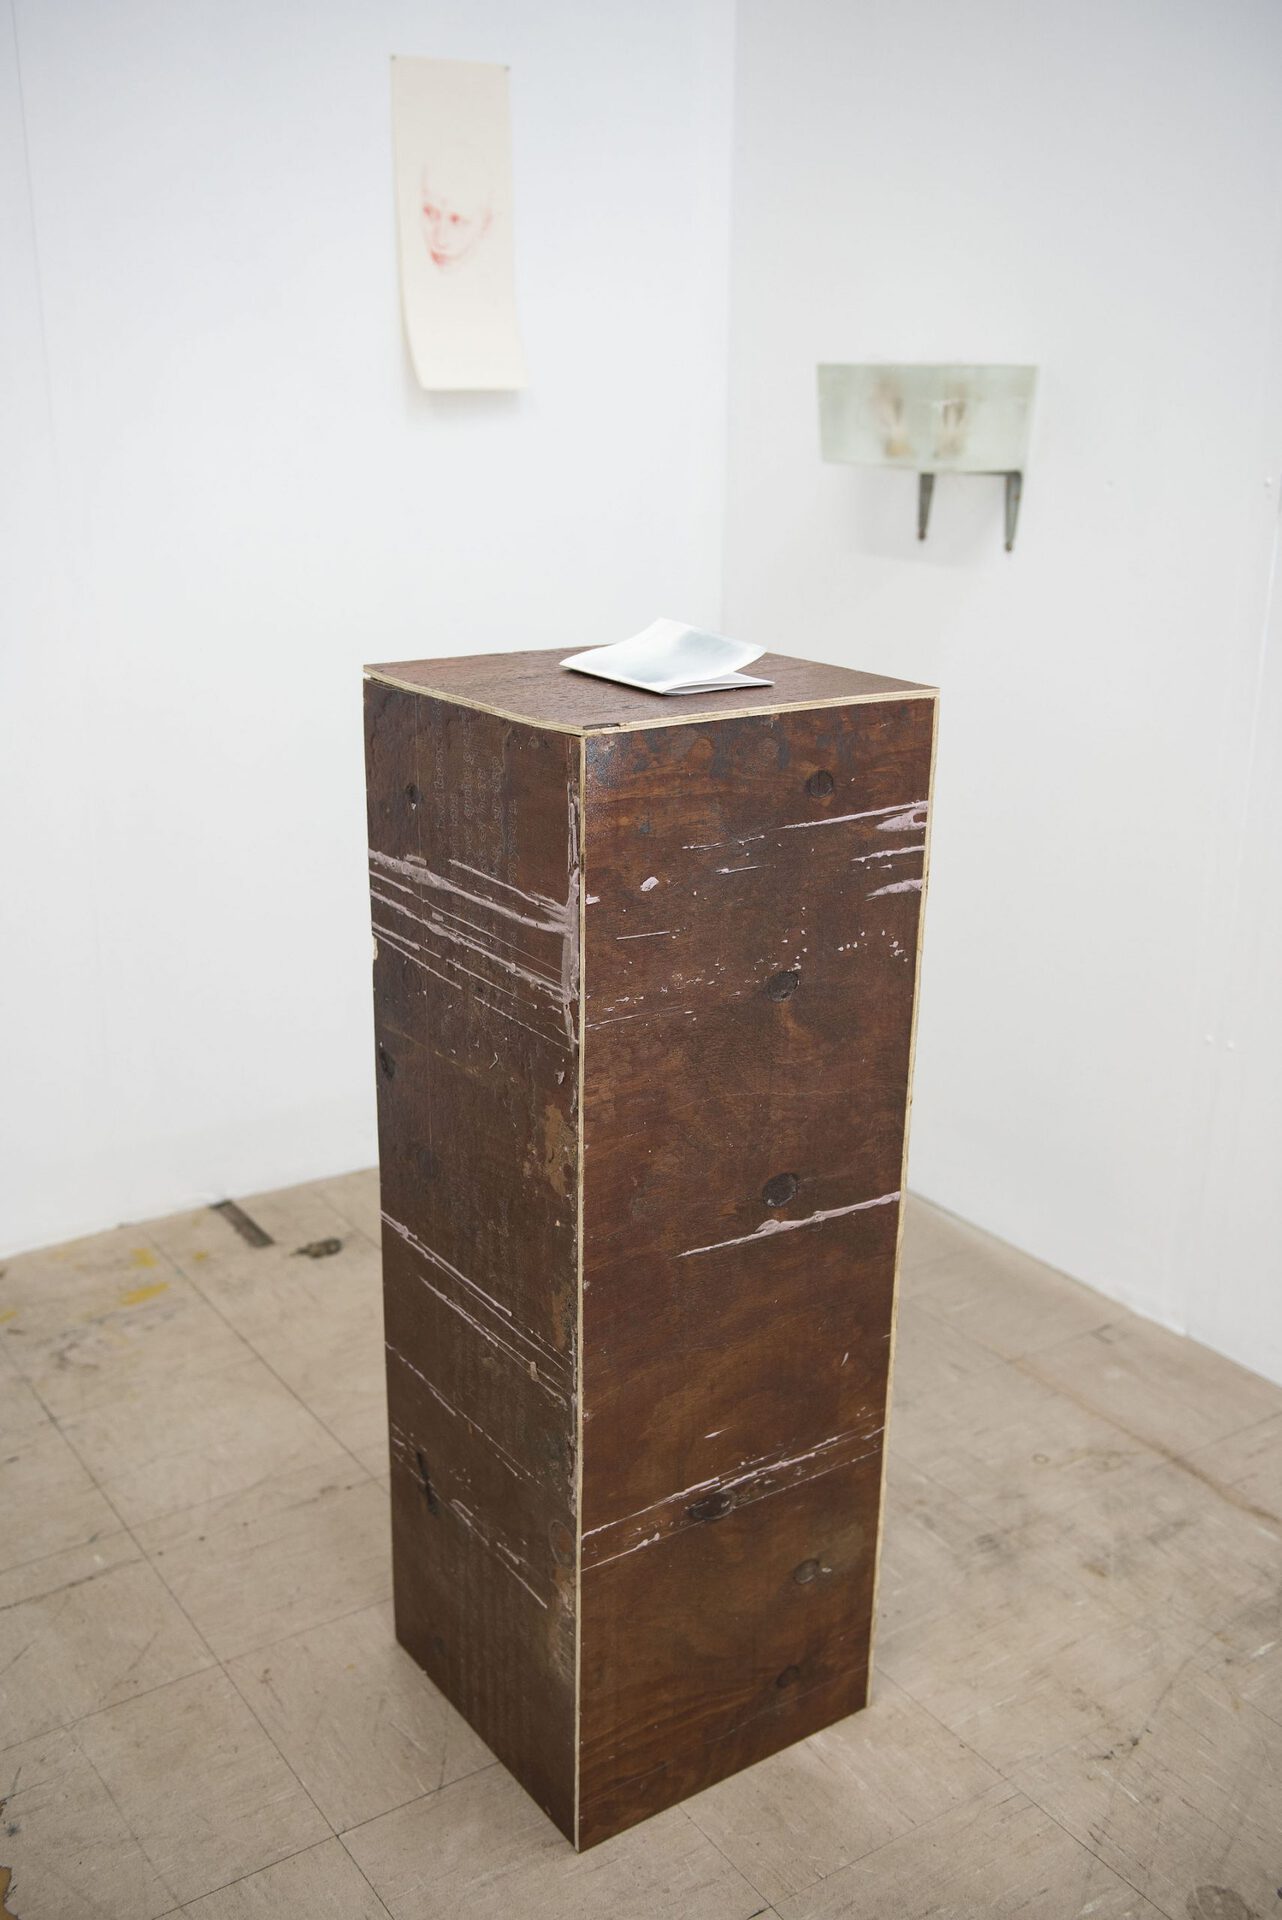 Tallulah Storm, Poem, 2020, written word, inkjet print and cyanotype on paper, dimensions variable. Plinth by Zoe Jackson